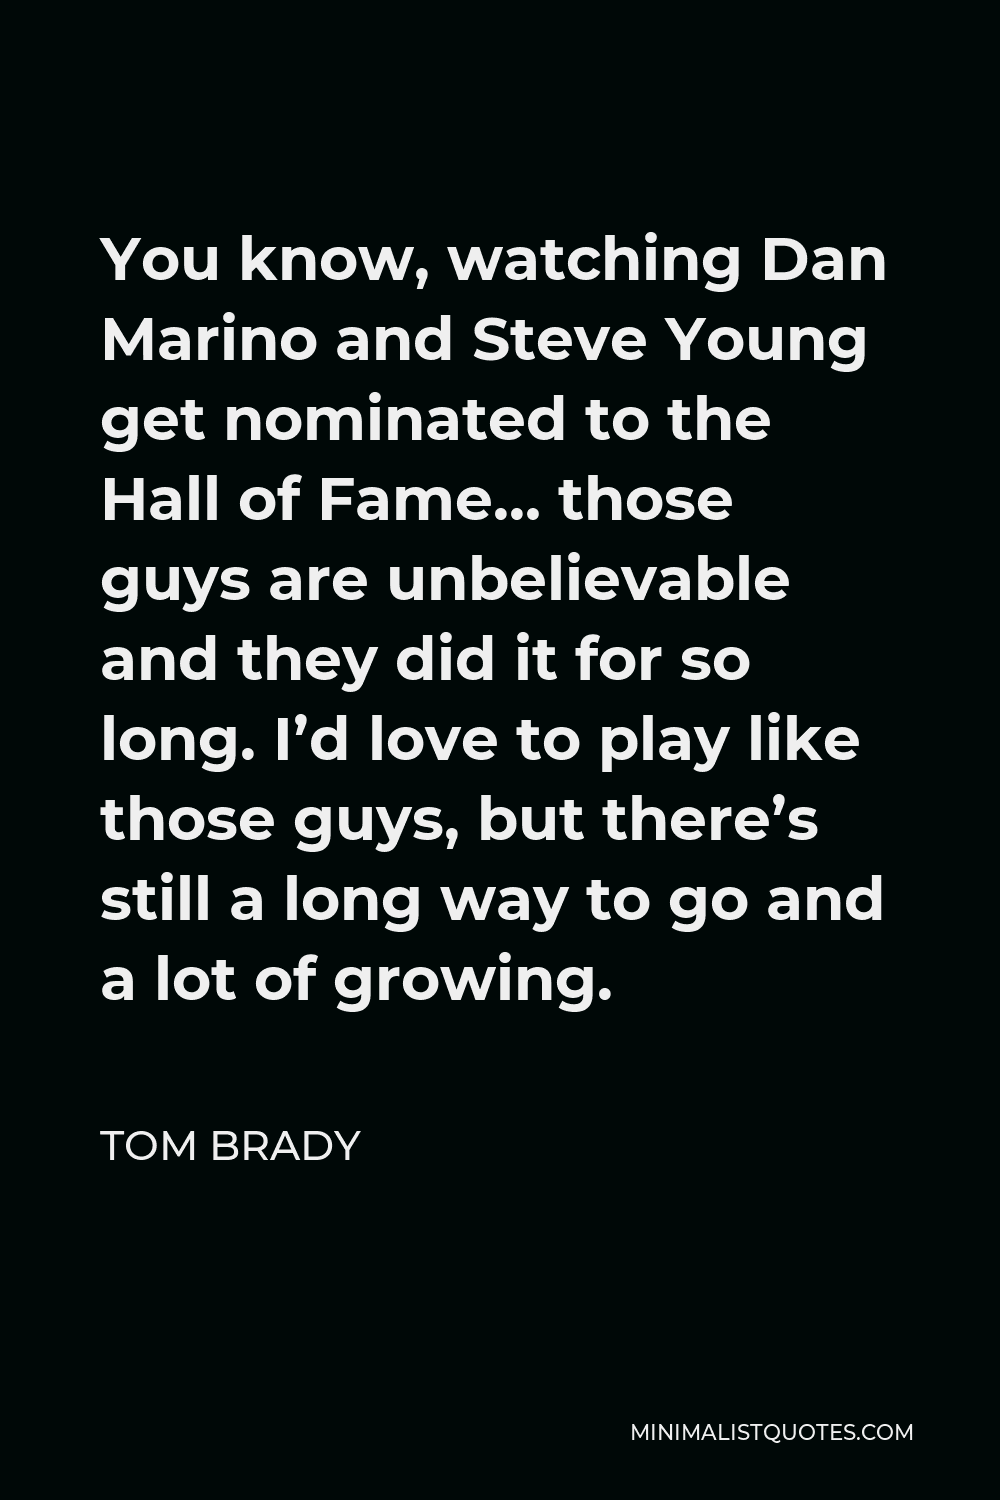 Tom Brady Quote - You know, watching Dan Marino and Steve Young get nominated to the Hall of Fame… those guys are unbelievable and they did it for so long. I’d love to play like those guys, but there’s still a long way to go and a lot of growing.